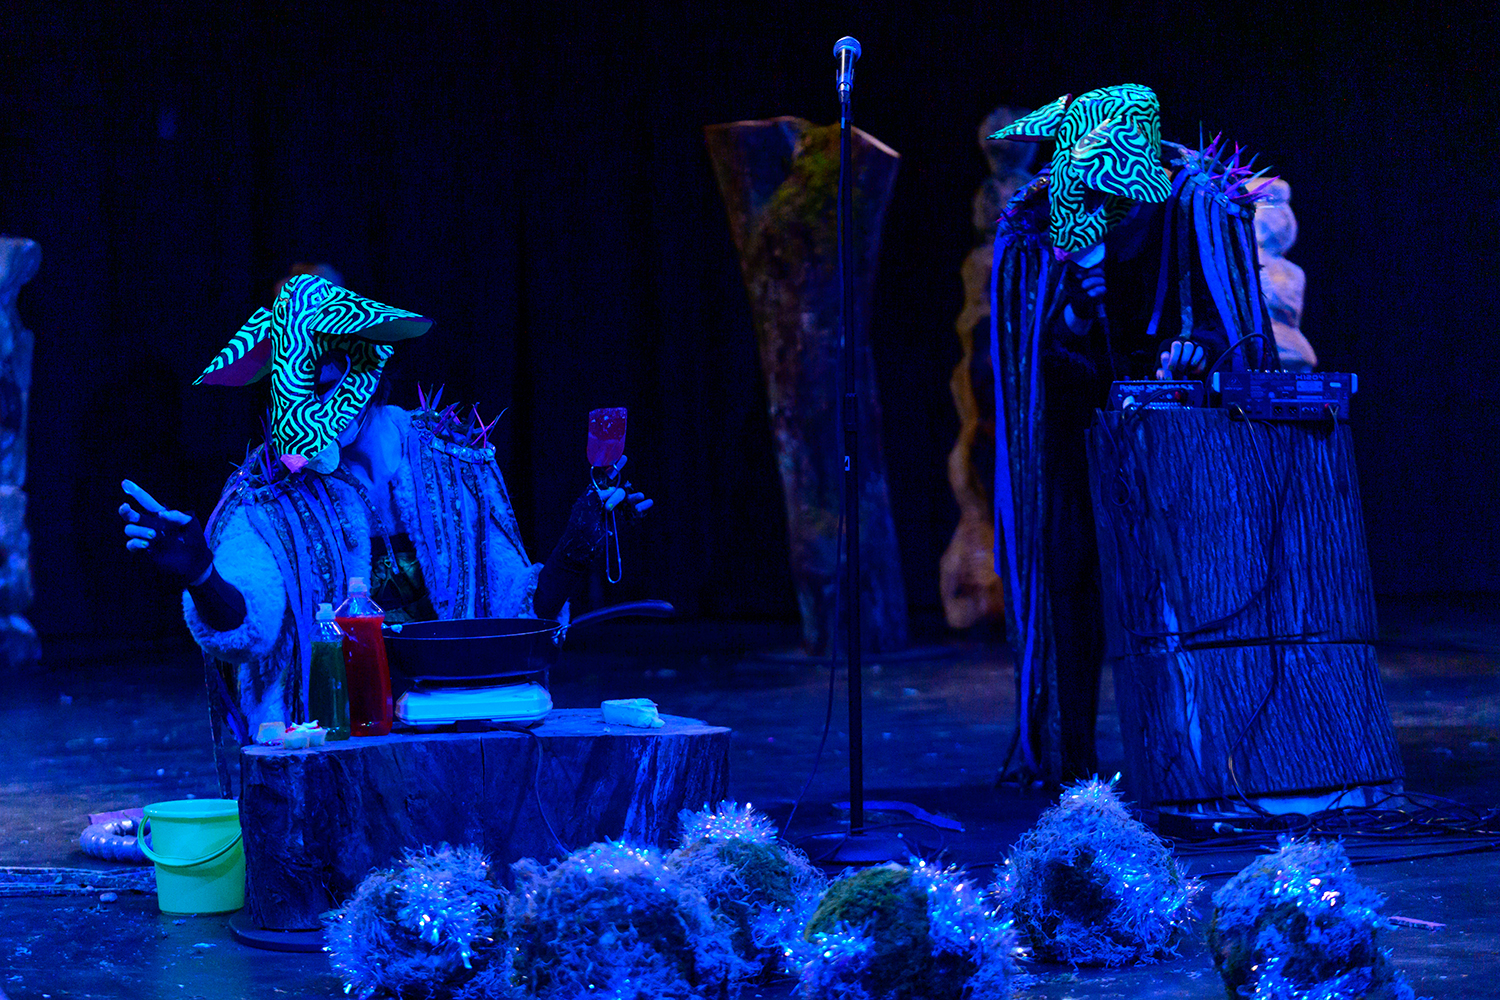 Two figures wearing neon rat masks in a theatre space. The one on the left kneels in front of a tree stump - atop it are a hot plate and frying pan and two bottles of soap. The figure on the right crouches over a tree stump that holds a small sound board and a microphone.